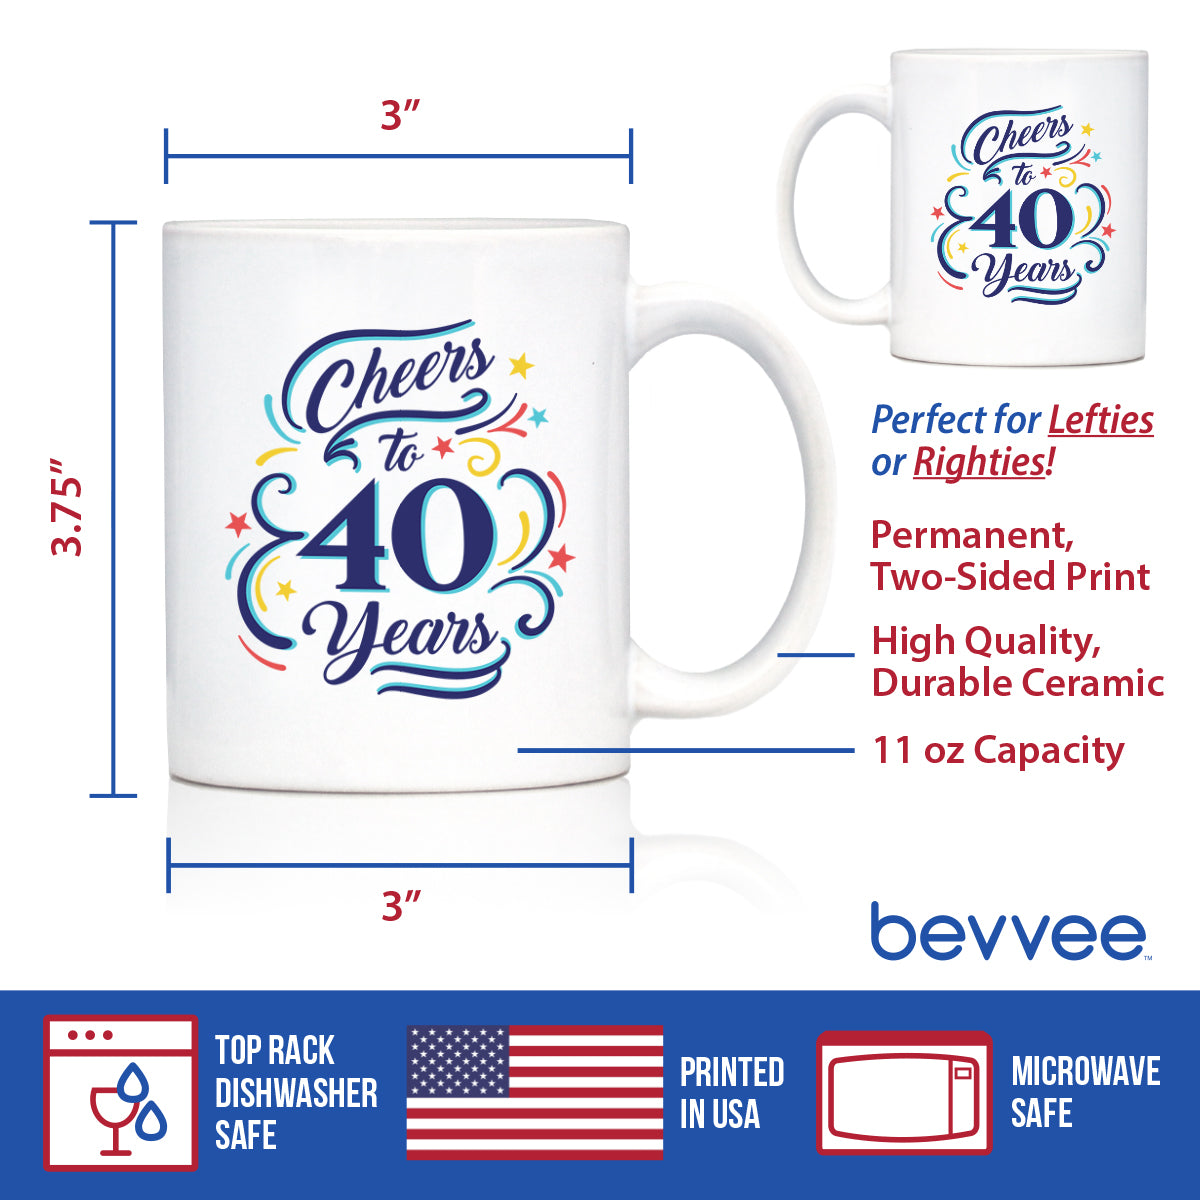 Cheers to 40 Years - Coffee Mug Gifts for Women &amp; Men - 40th Anniversary Party Decor